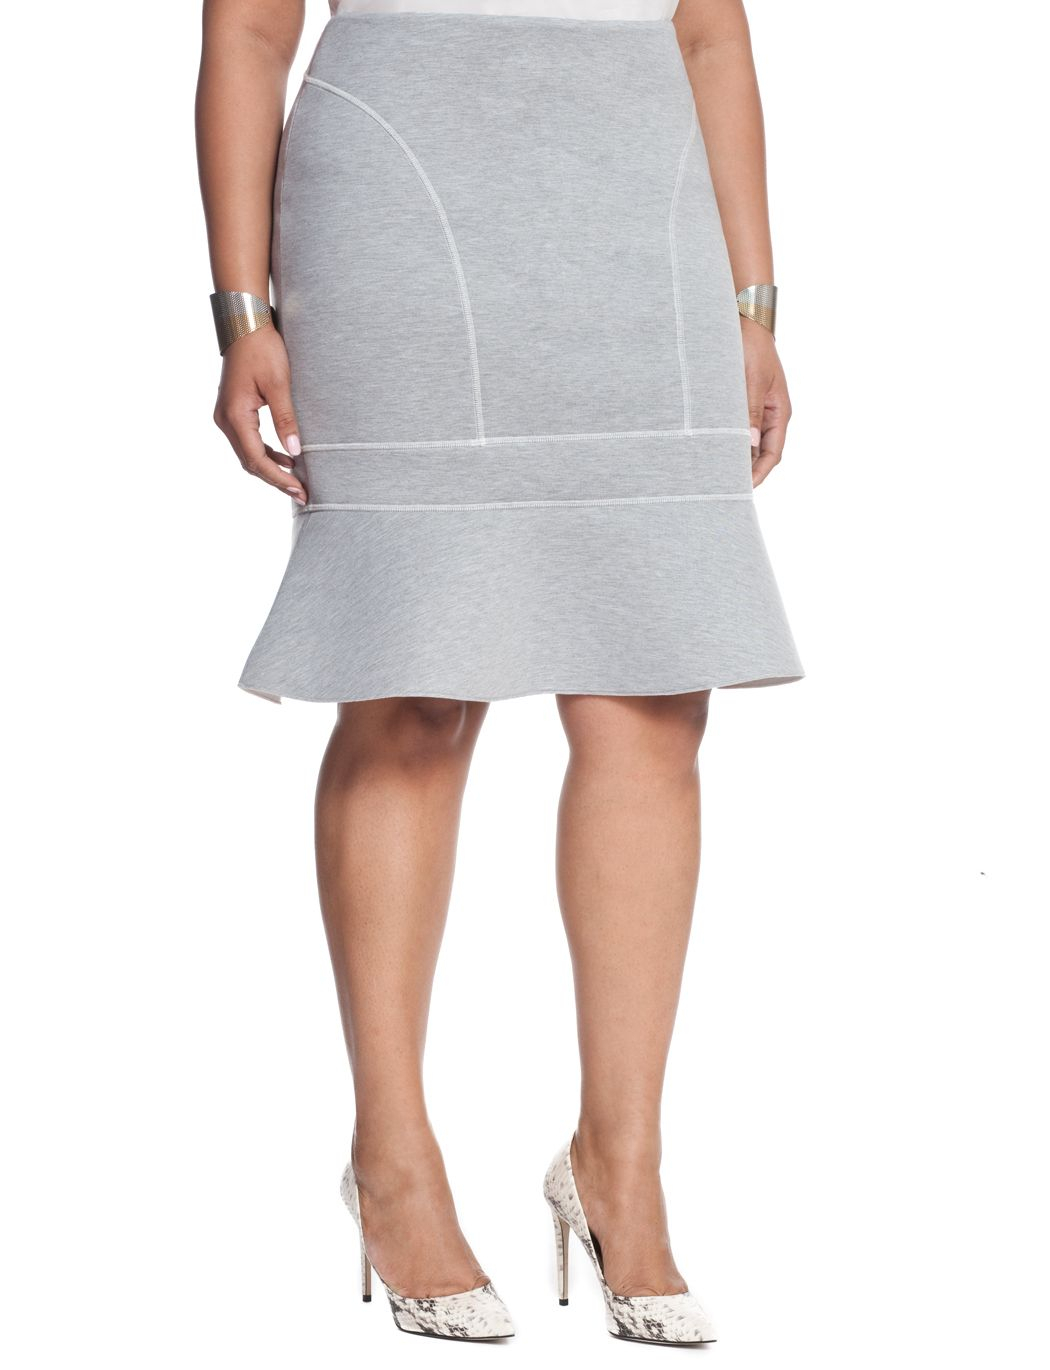 Stitched Skater Skirt | Women&amp;#039;S Plus Size Skirts | Eloquii tout Plus Size Skater Skirt